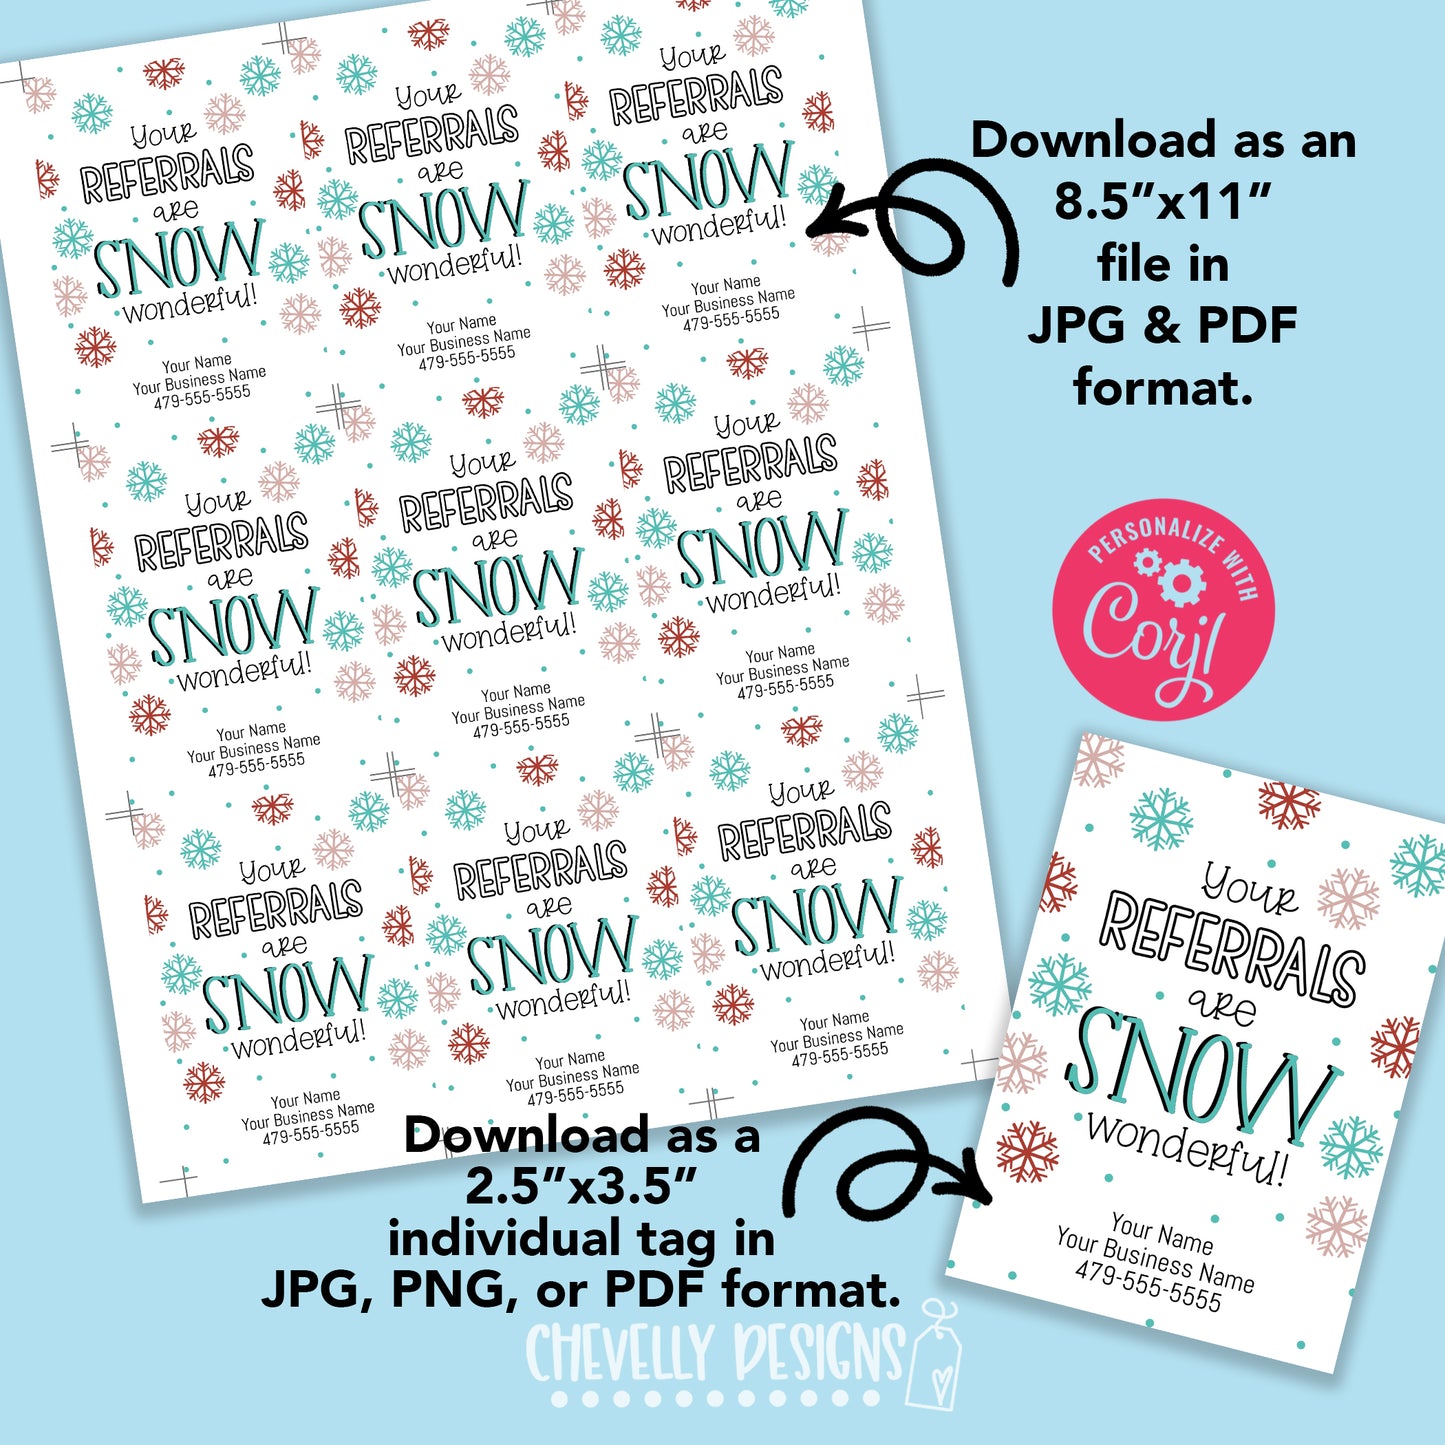 Editable Digital File - Your Referrals are SNOW Wonderful - Printable Gift Tags